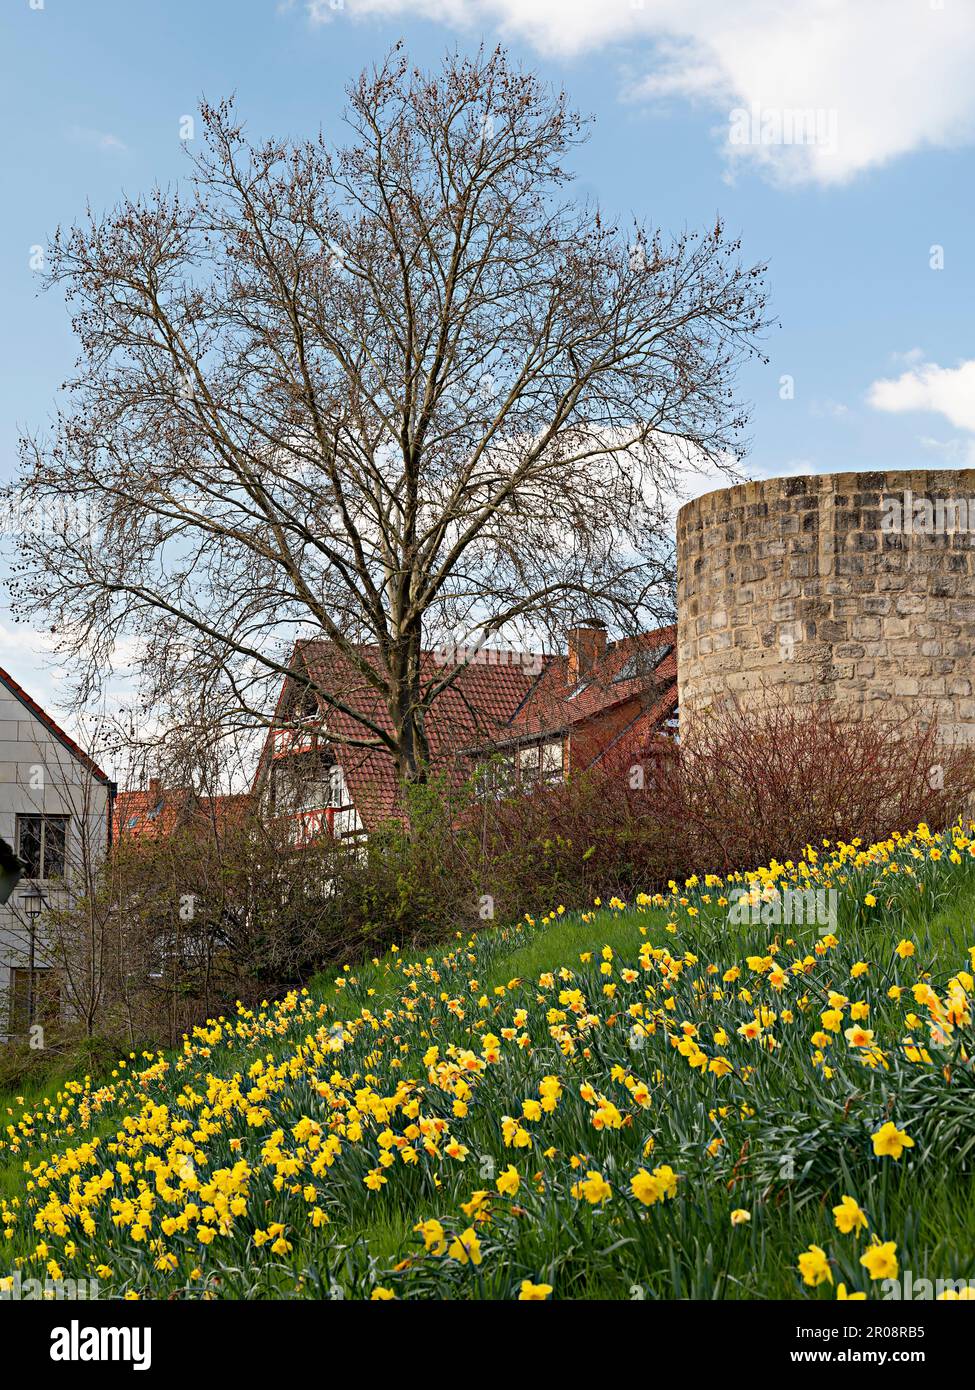 Fortified tower of Duderstadt city wall in spring with yellow daffodils in the foreground. Stock Photo